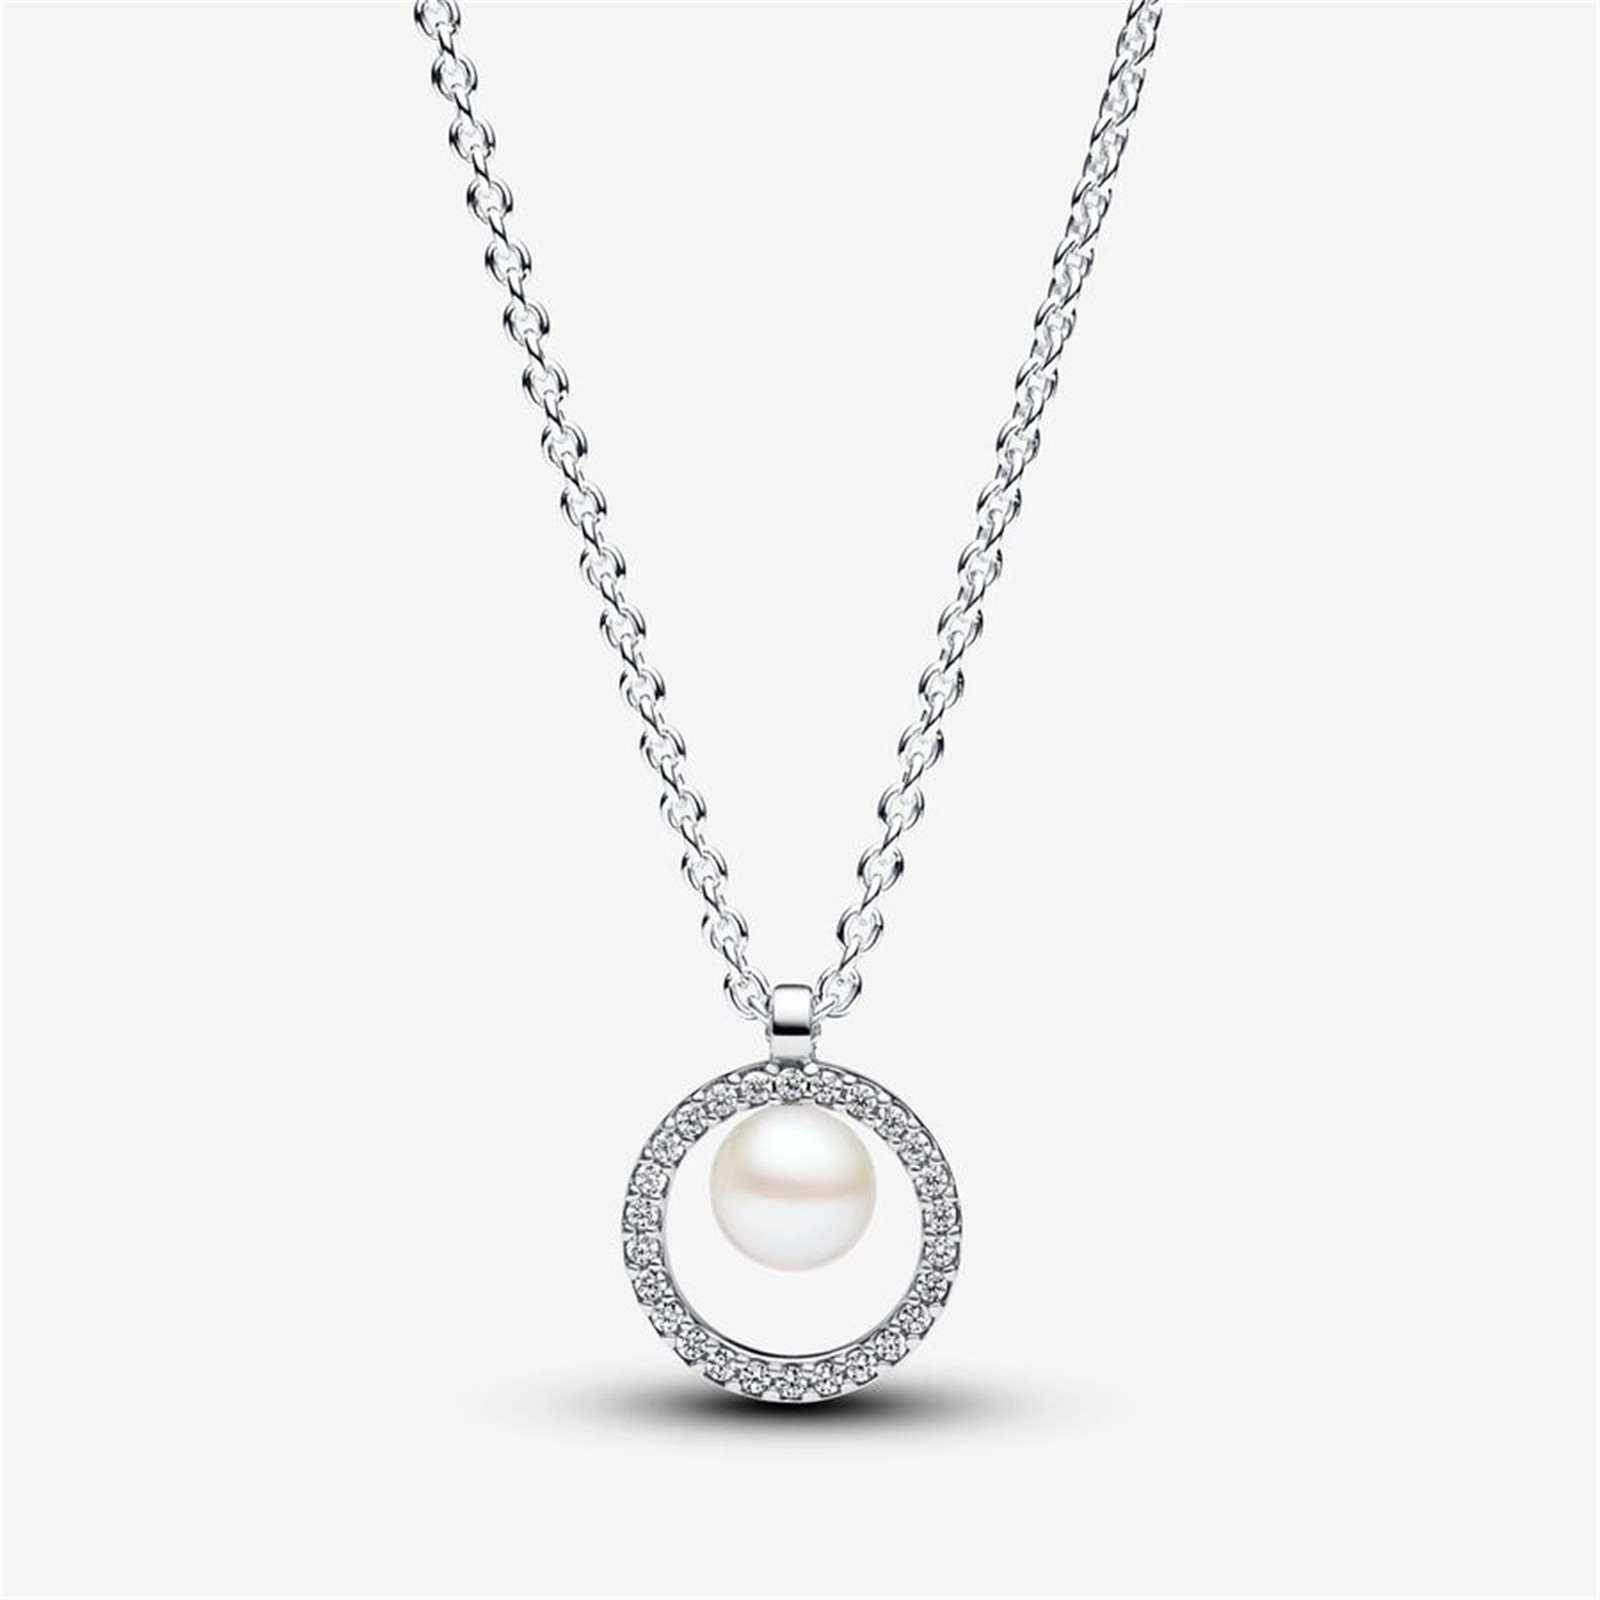 Sterling Silver Pandora Fresh Water Pearl Necklace,Proposal Gift,Gift For Her - £19.17 GBP